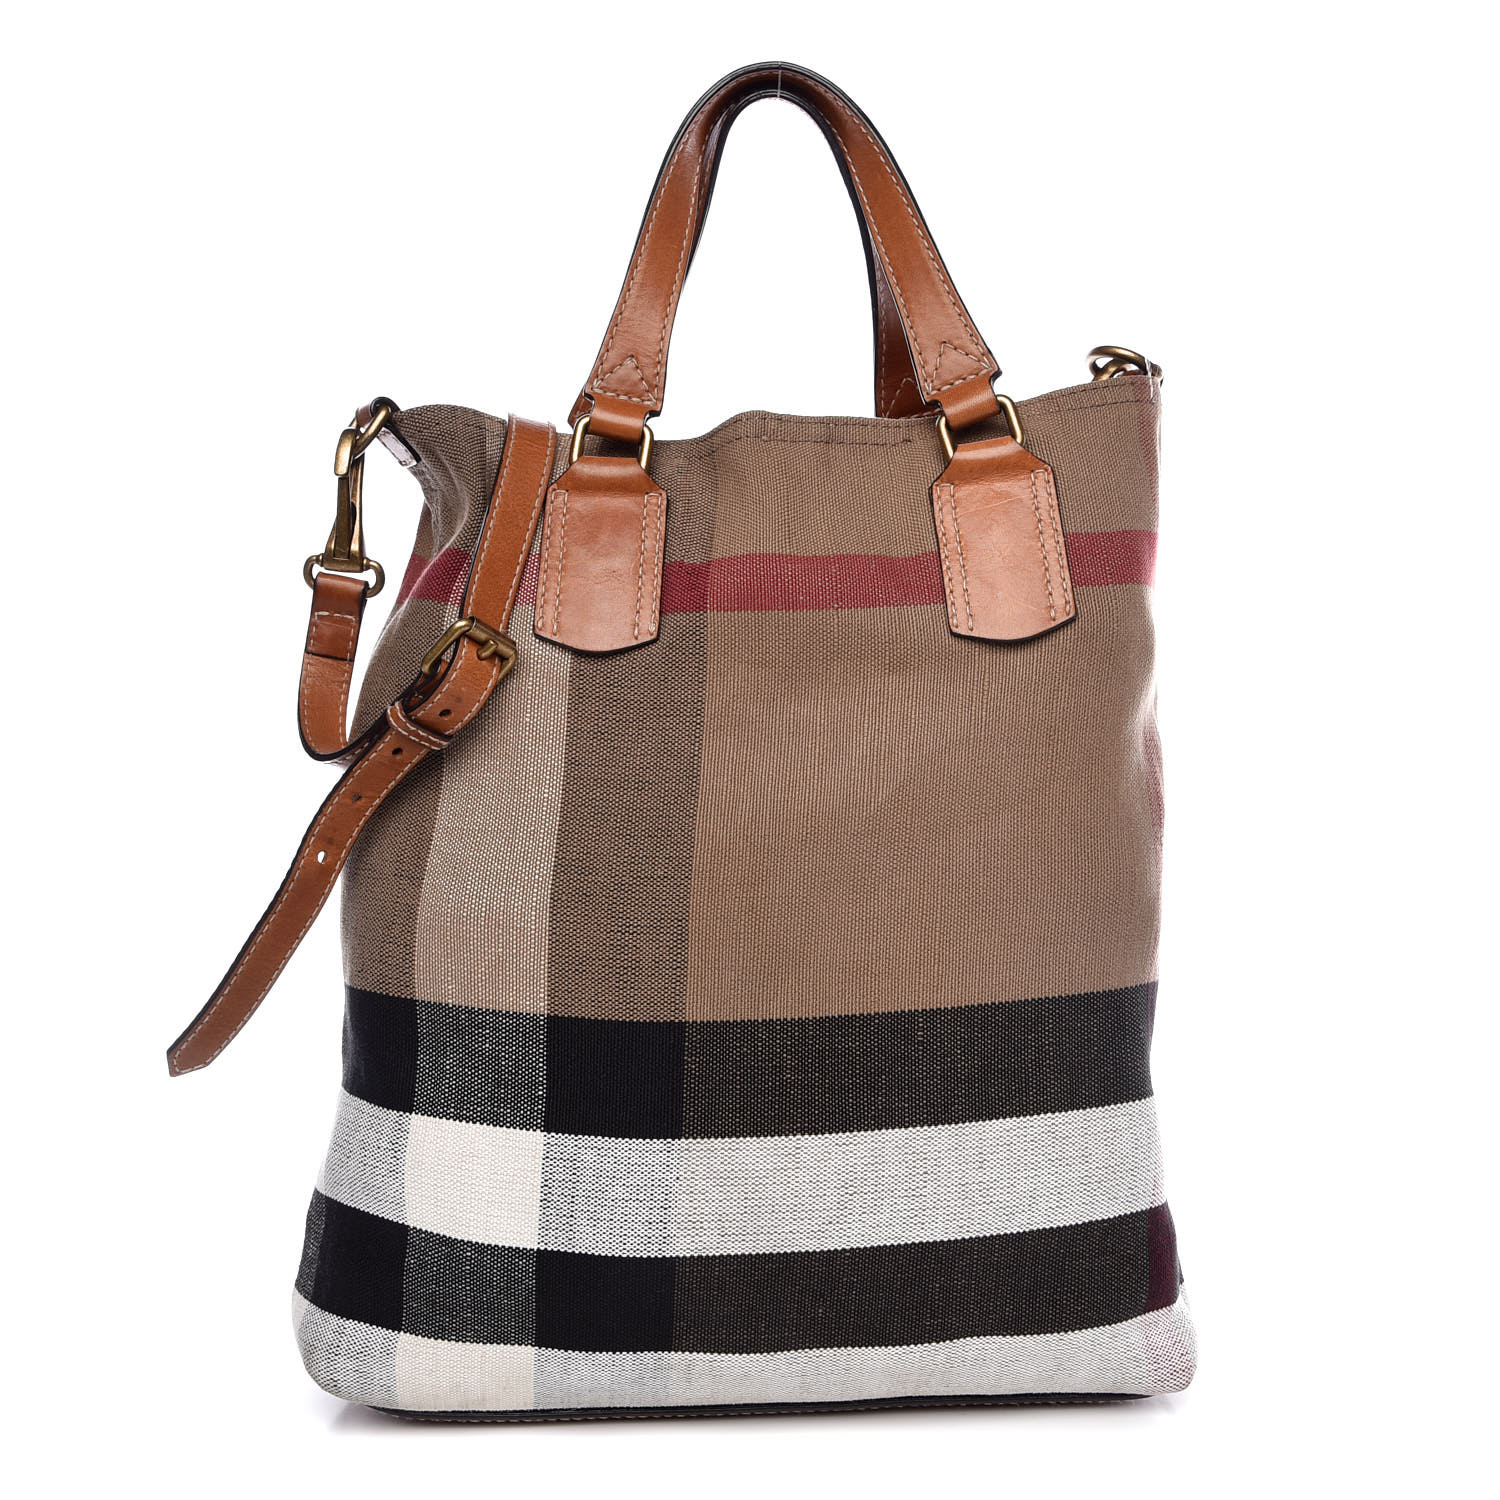 burberry large canvas check tote bag